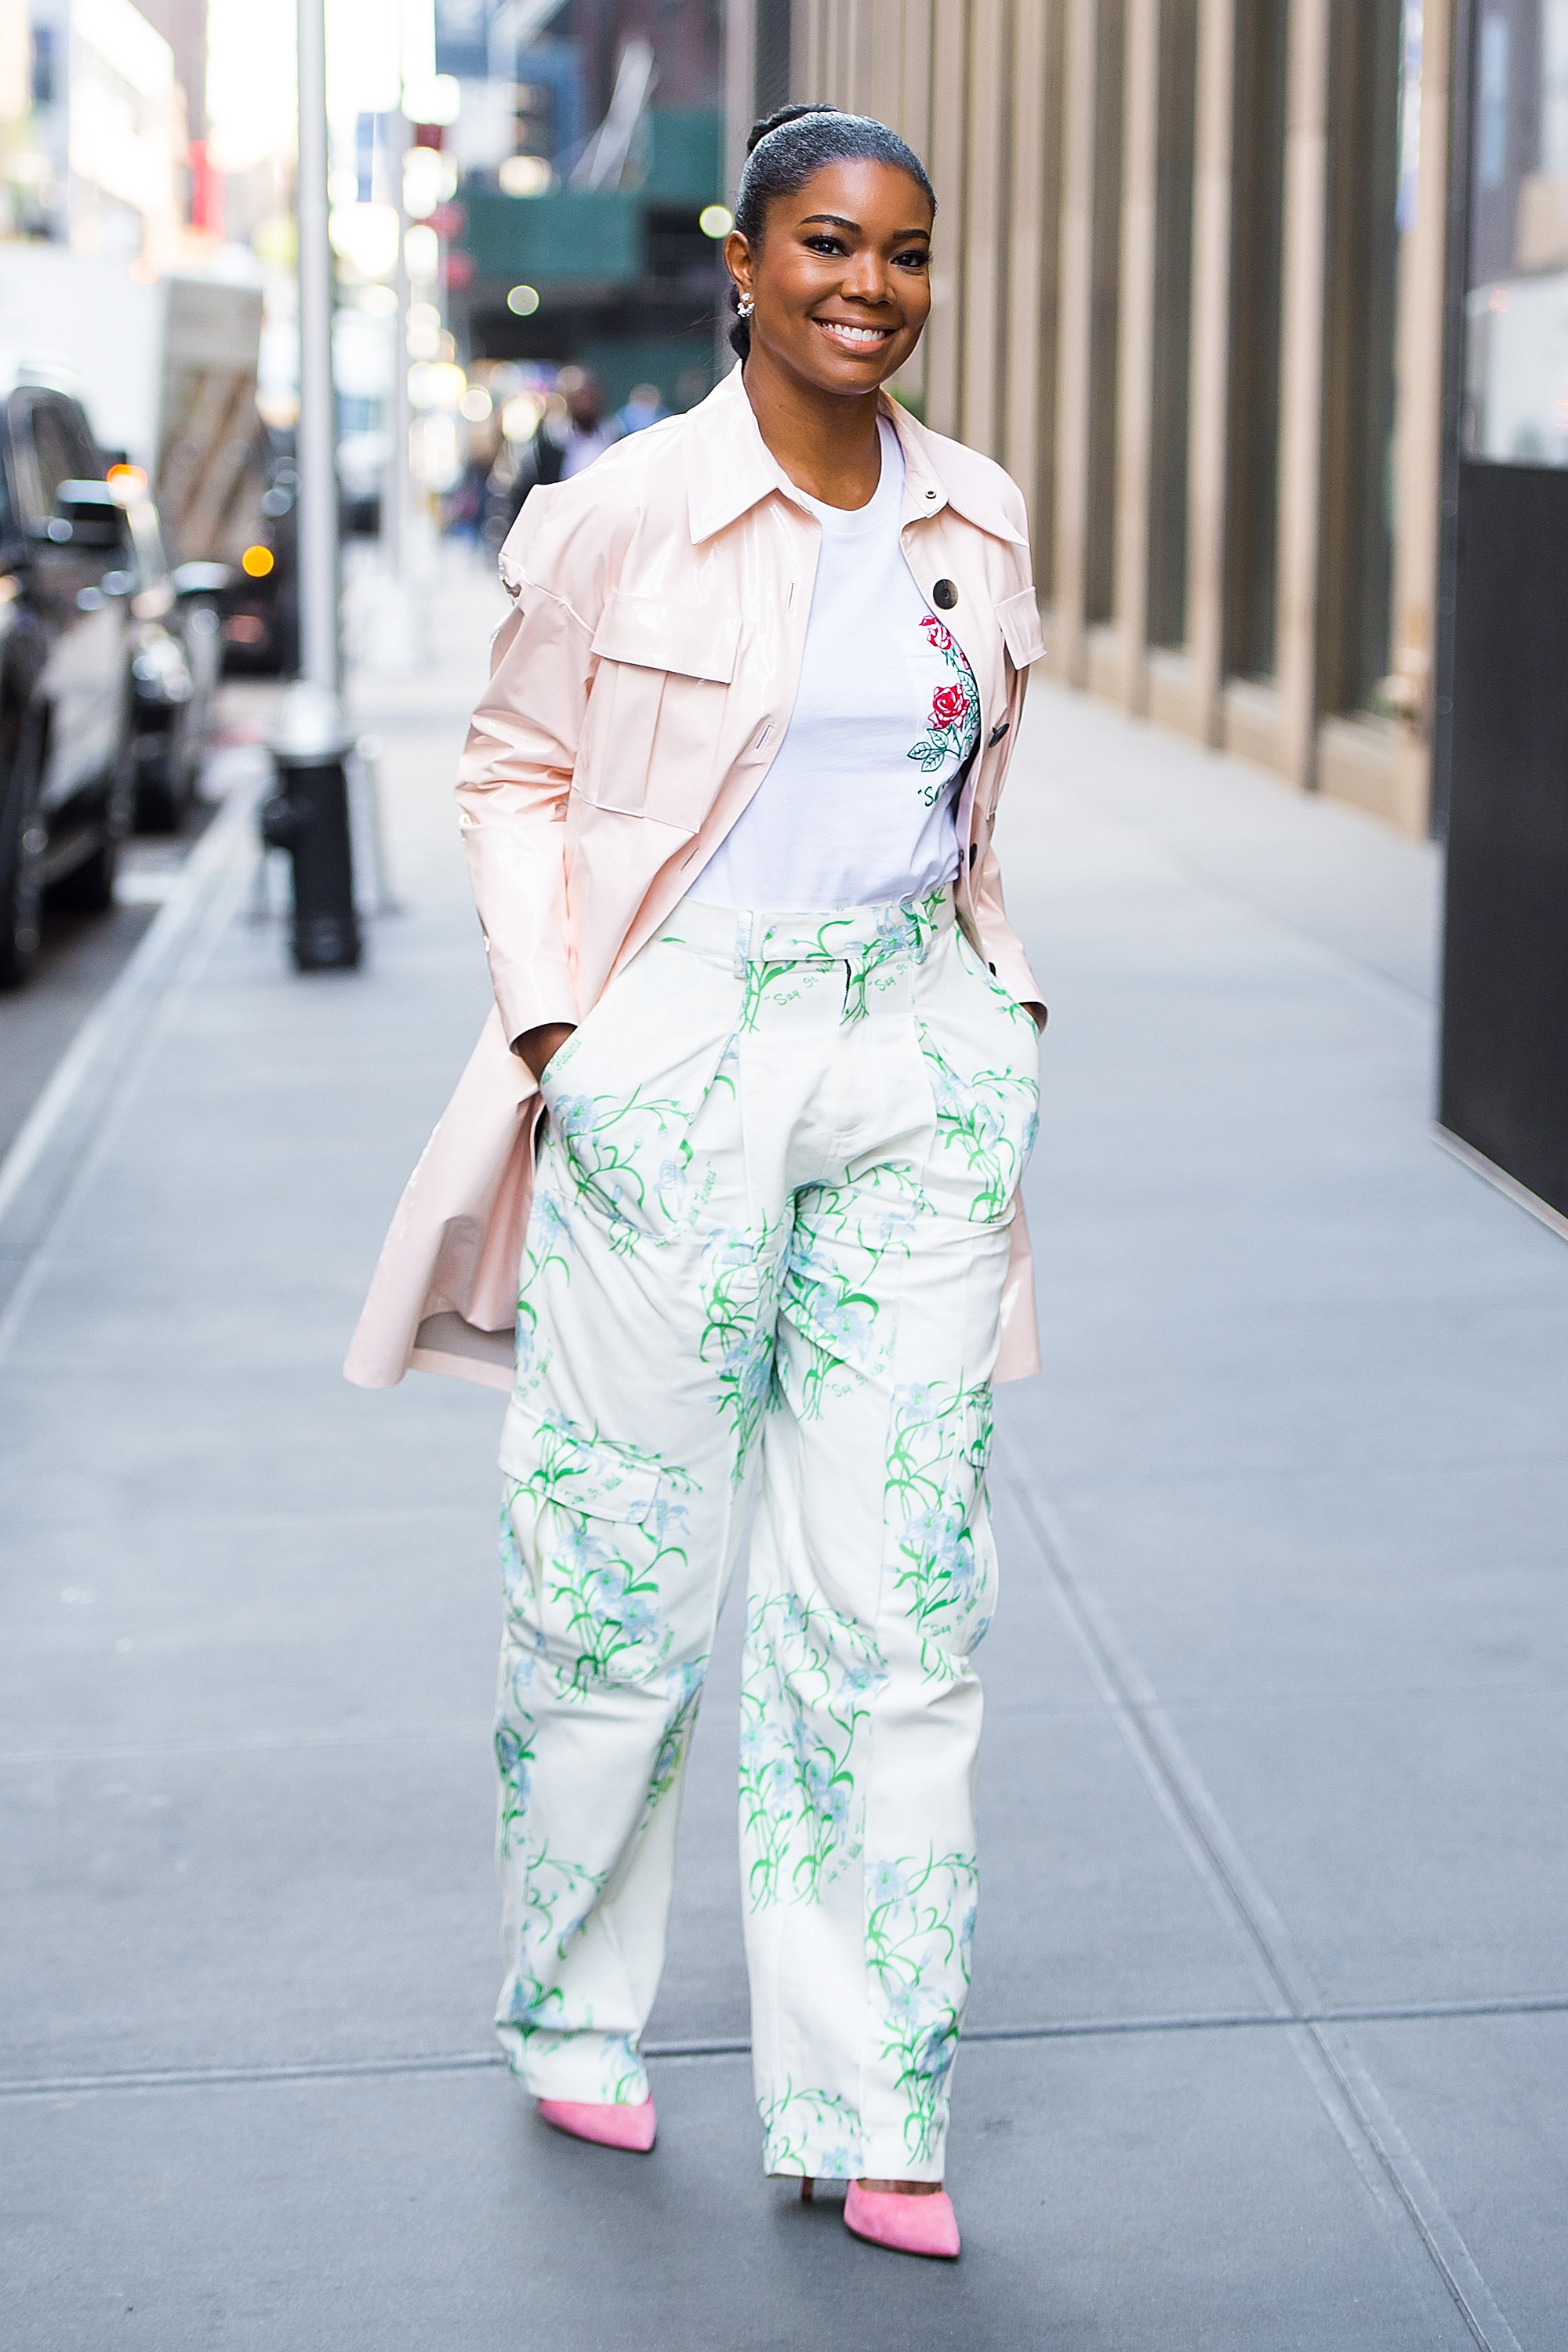 Gabrielle Union in a blush overcoat, green patterned pants and a floral embroidered t-shirt